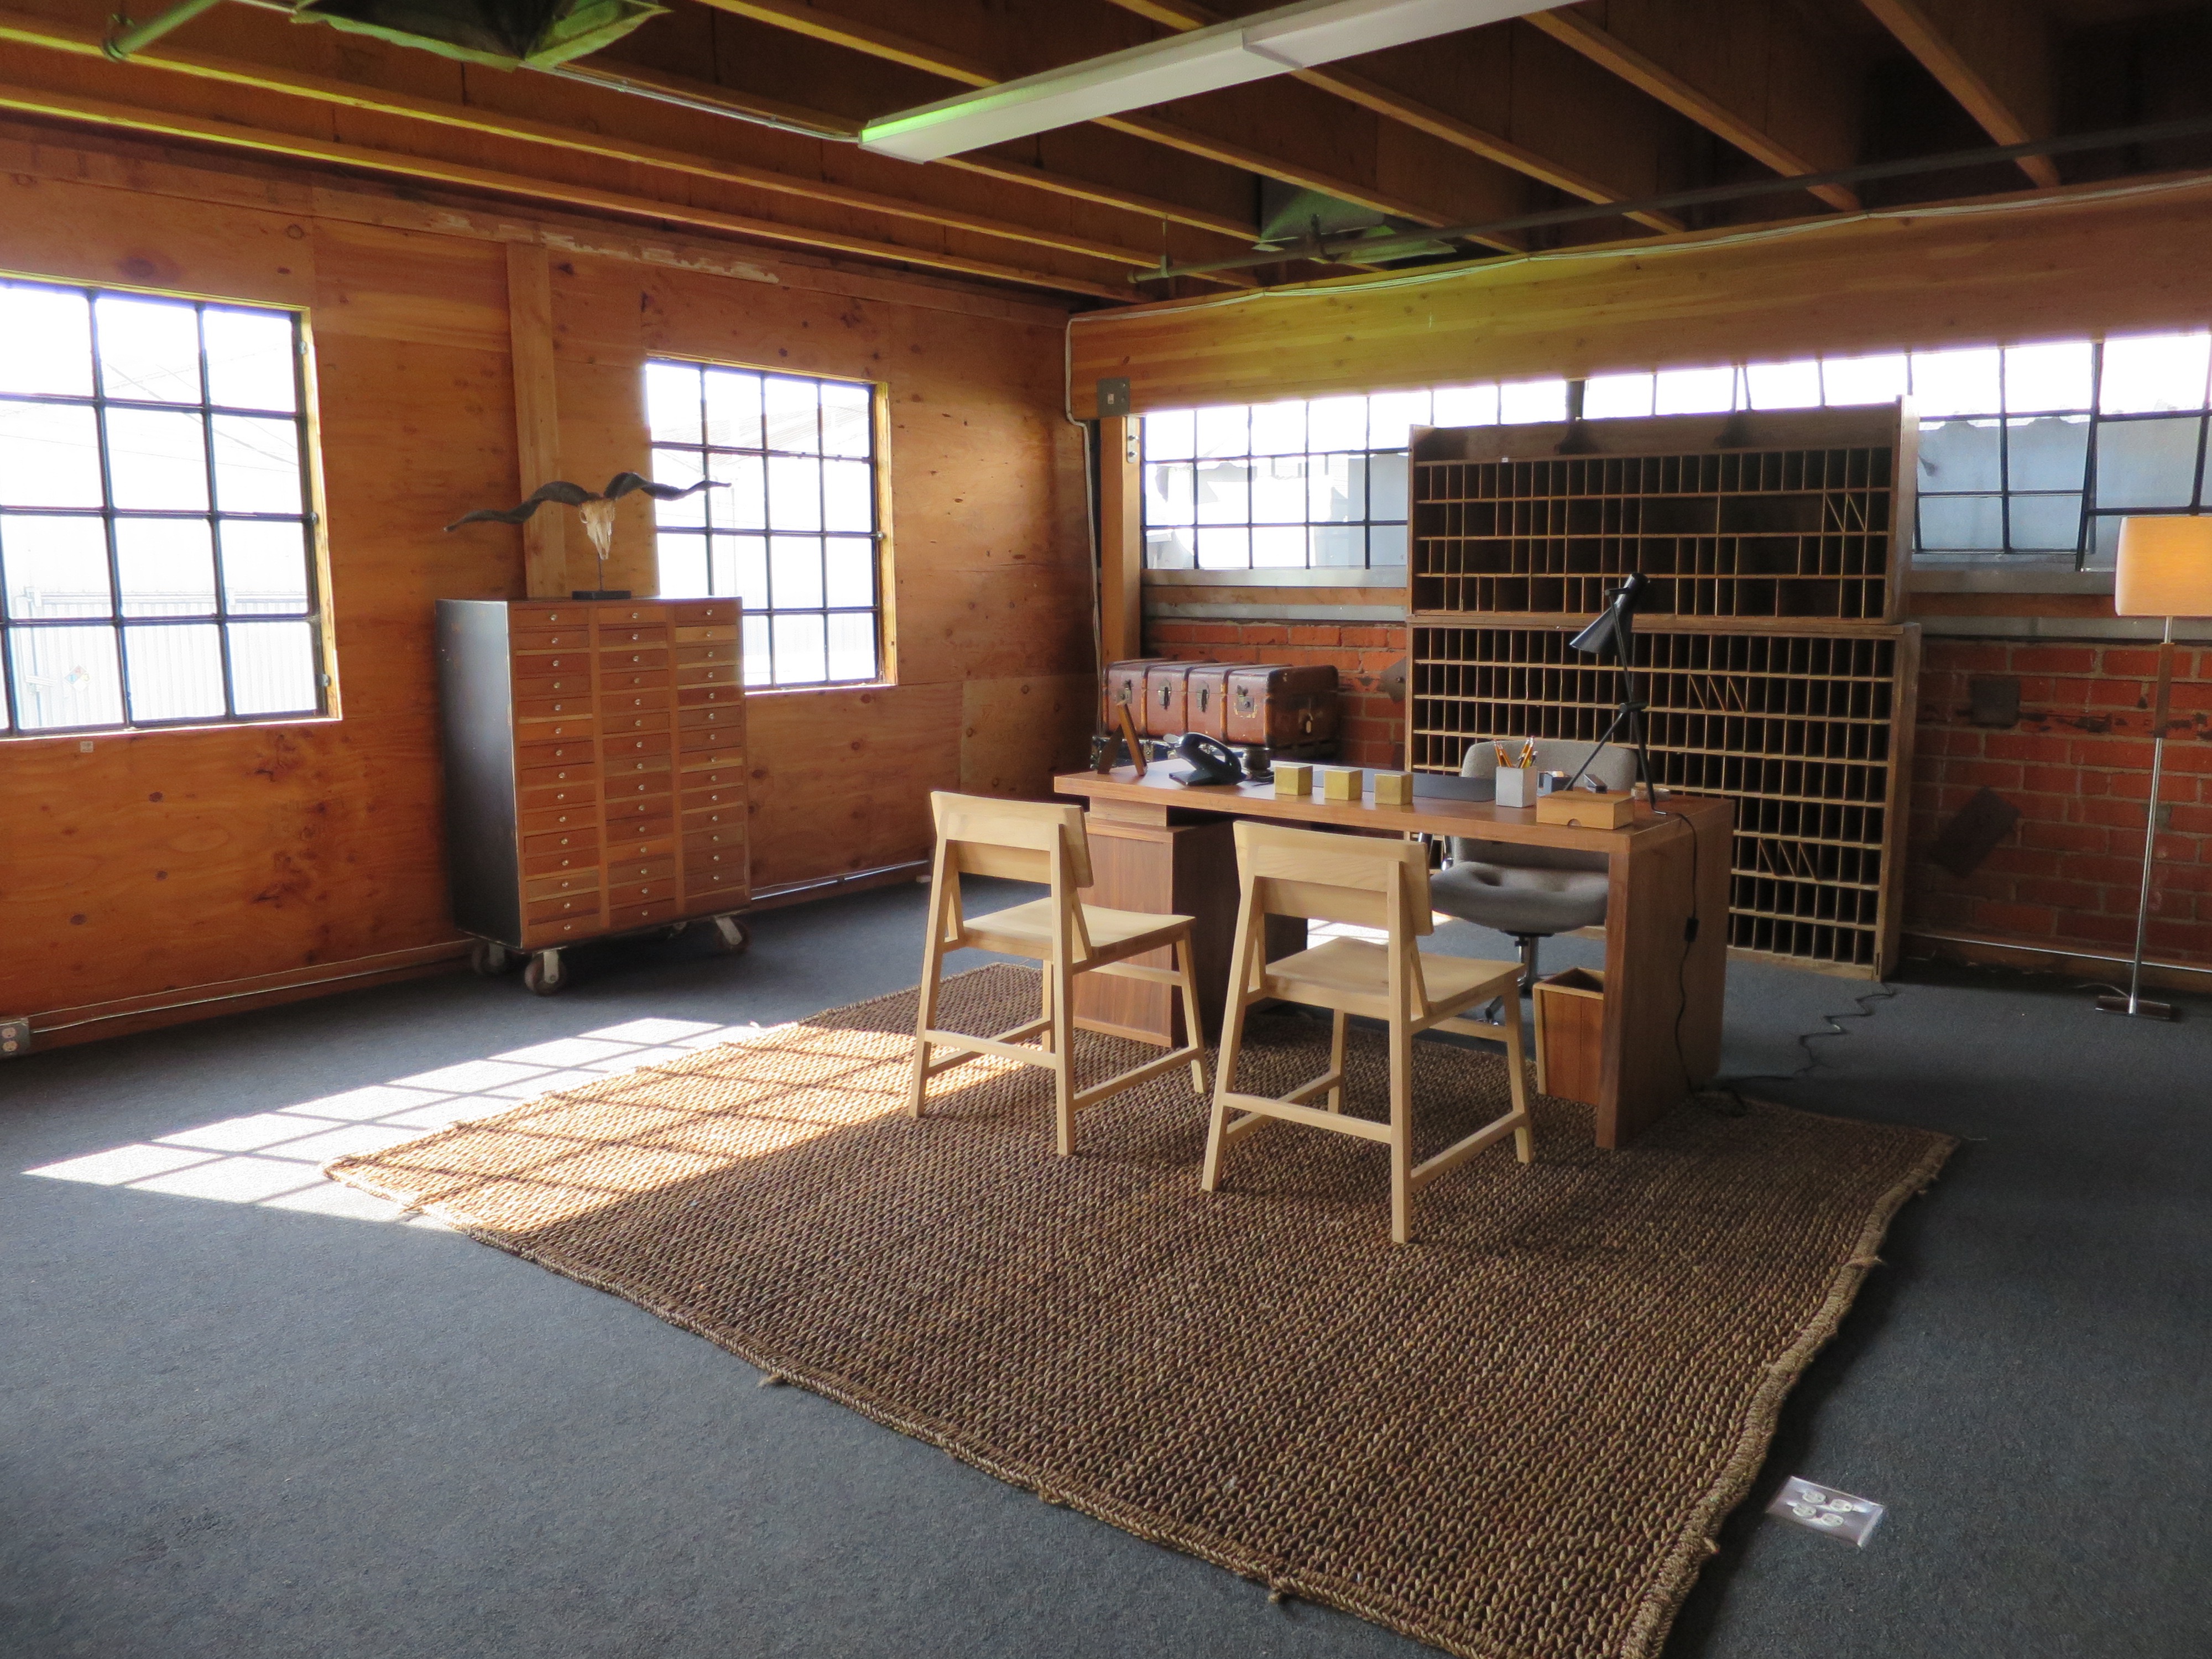 Interior of office set into corner of warehouse space with plain wood furniture.